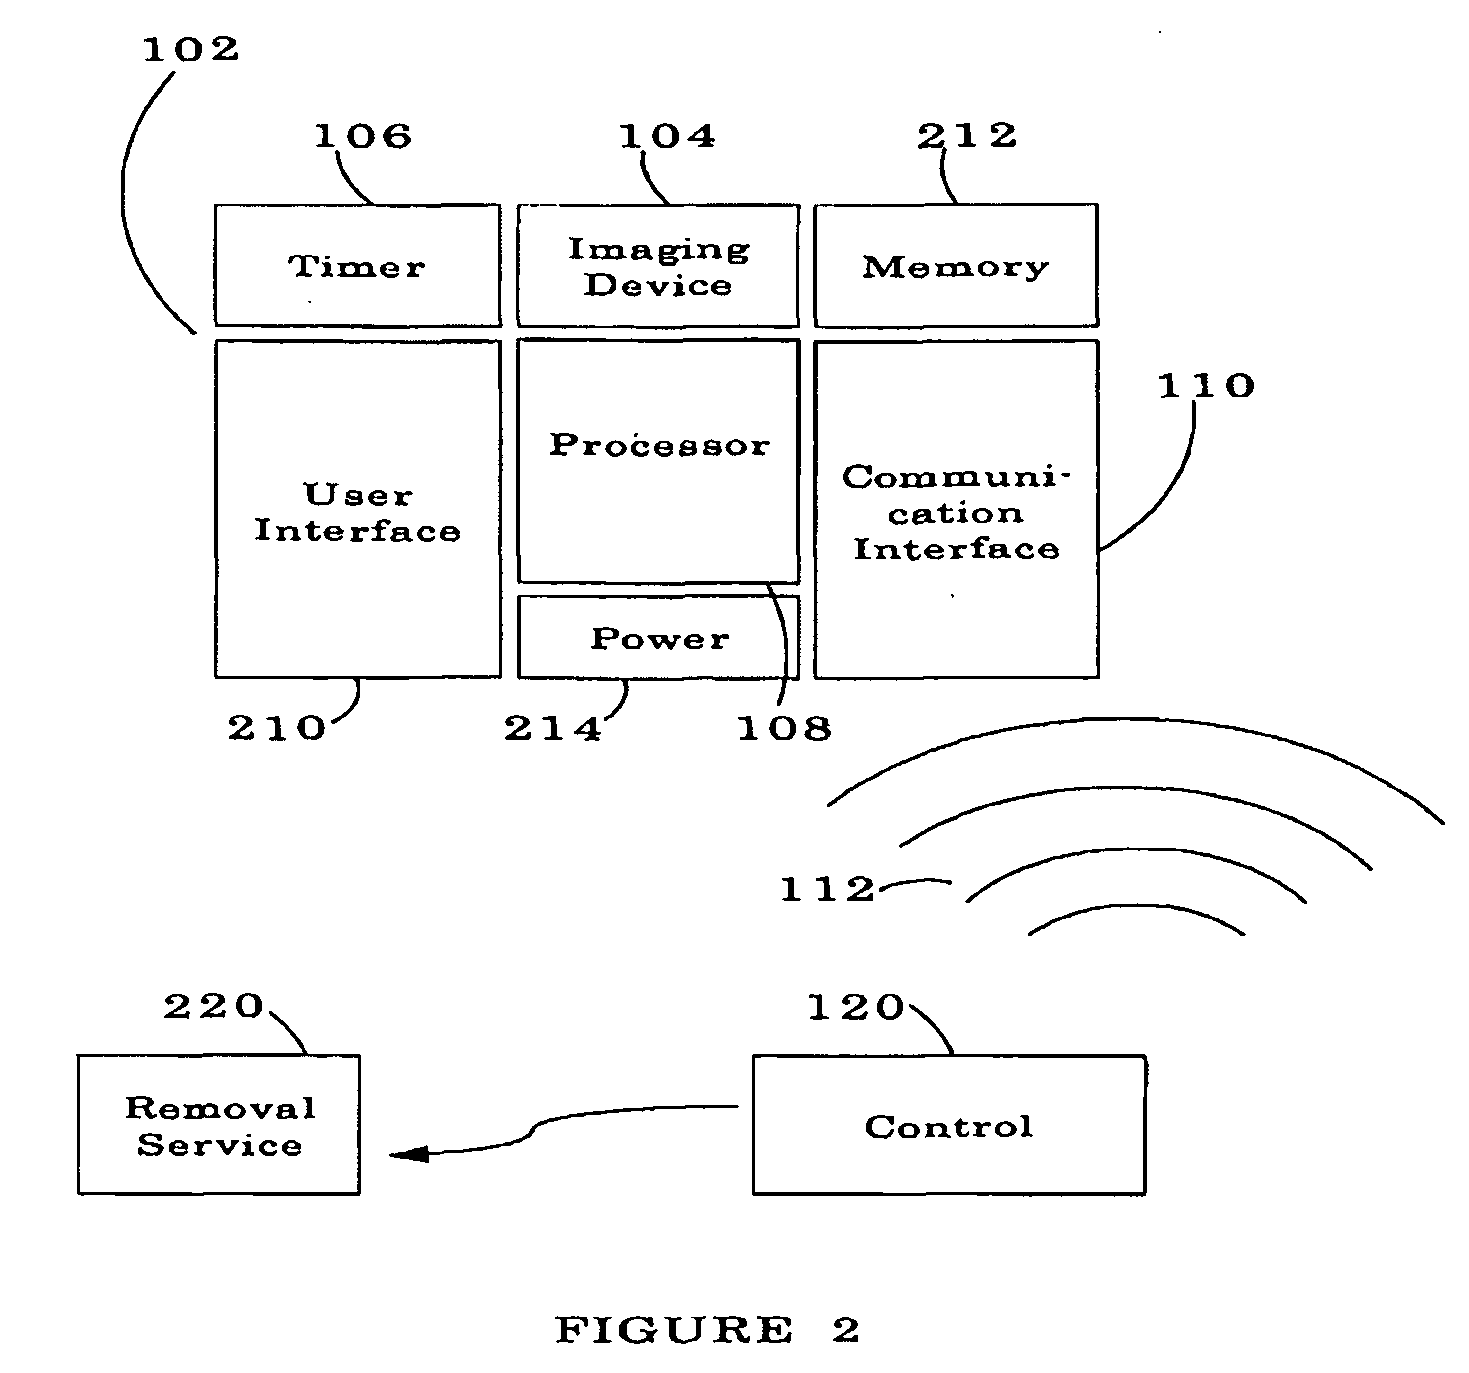 Time monitoring system